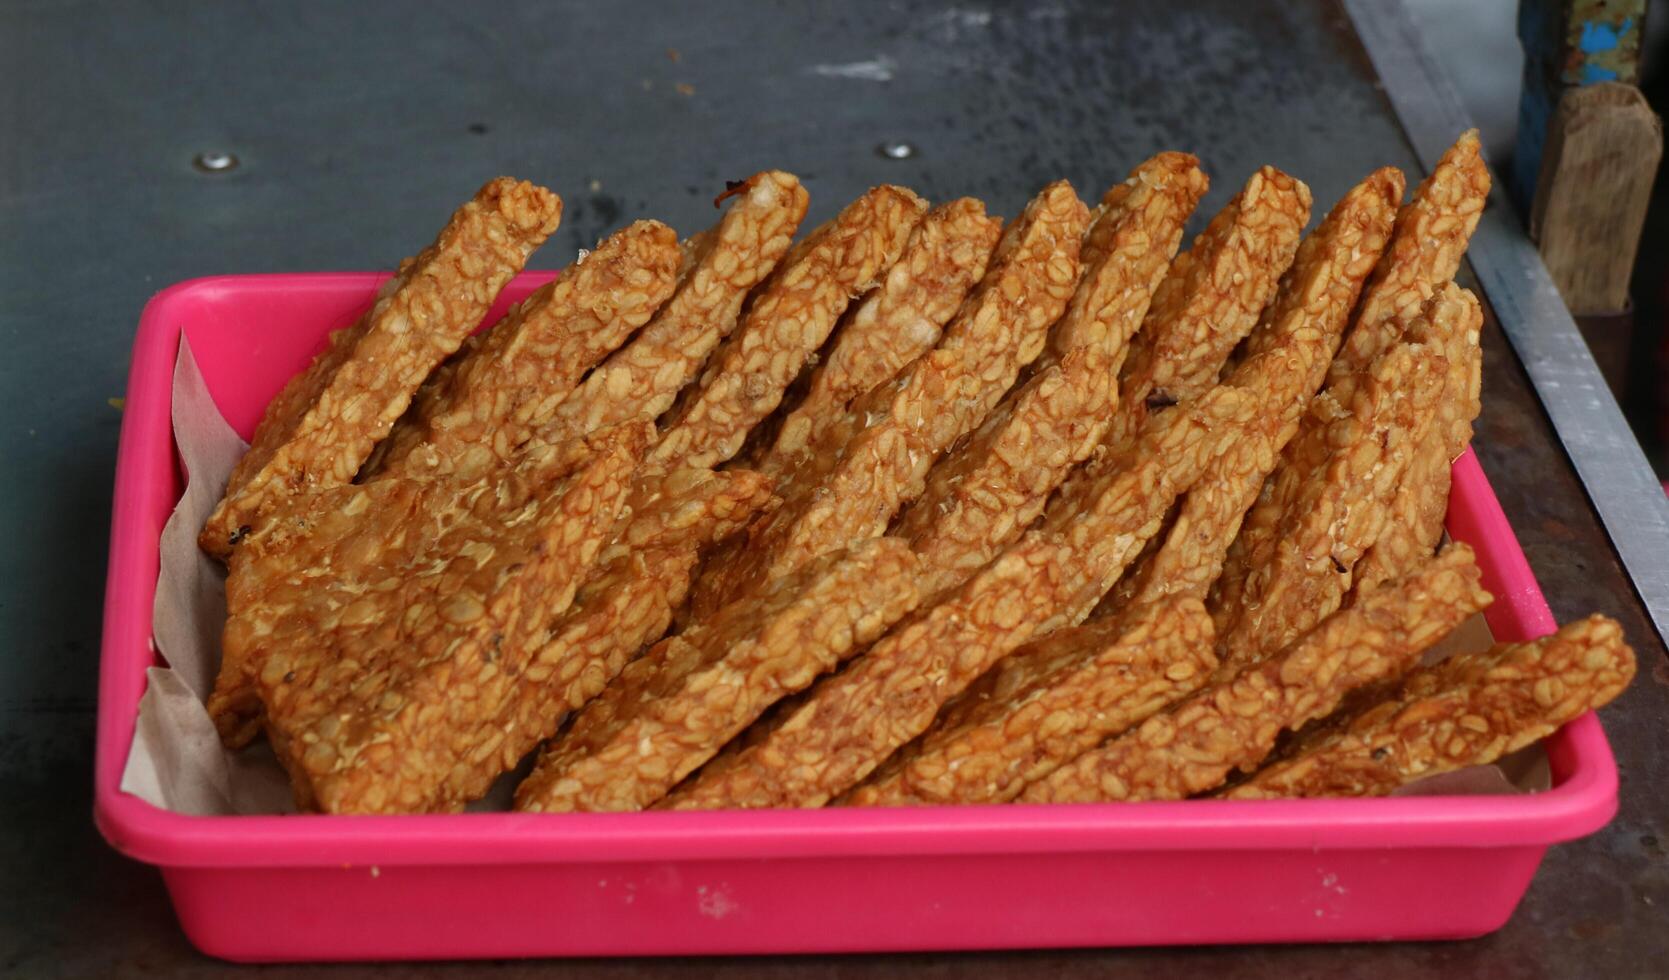 Slices of tempe ready to eat photo